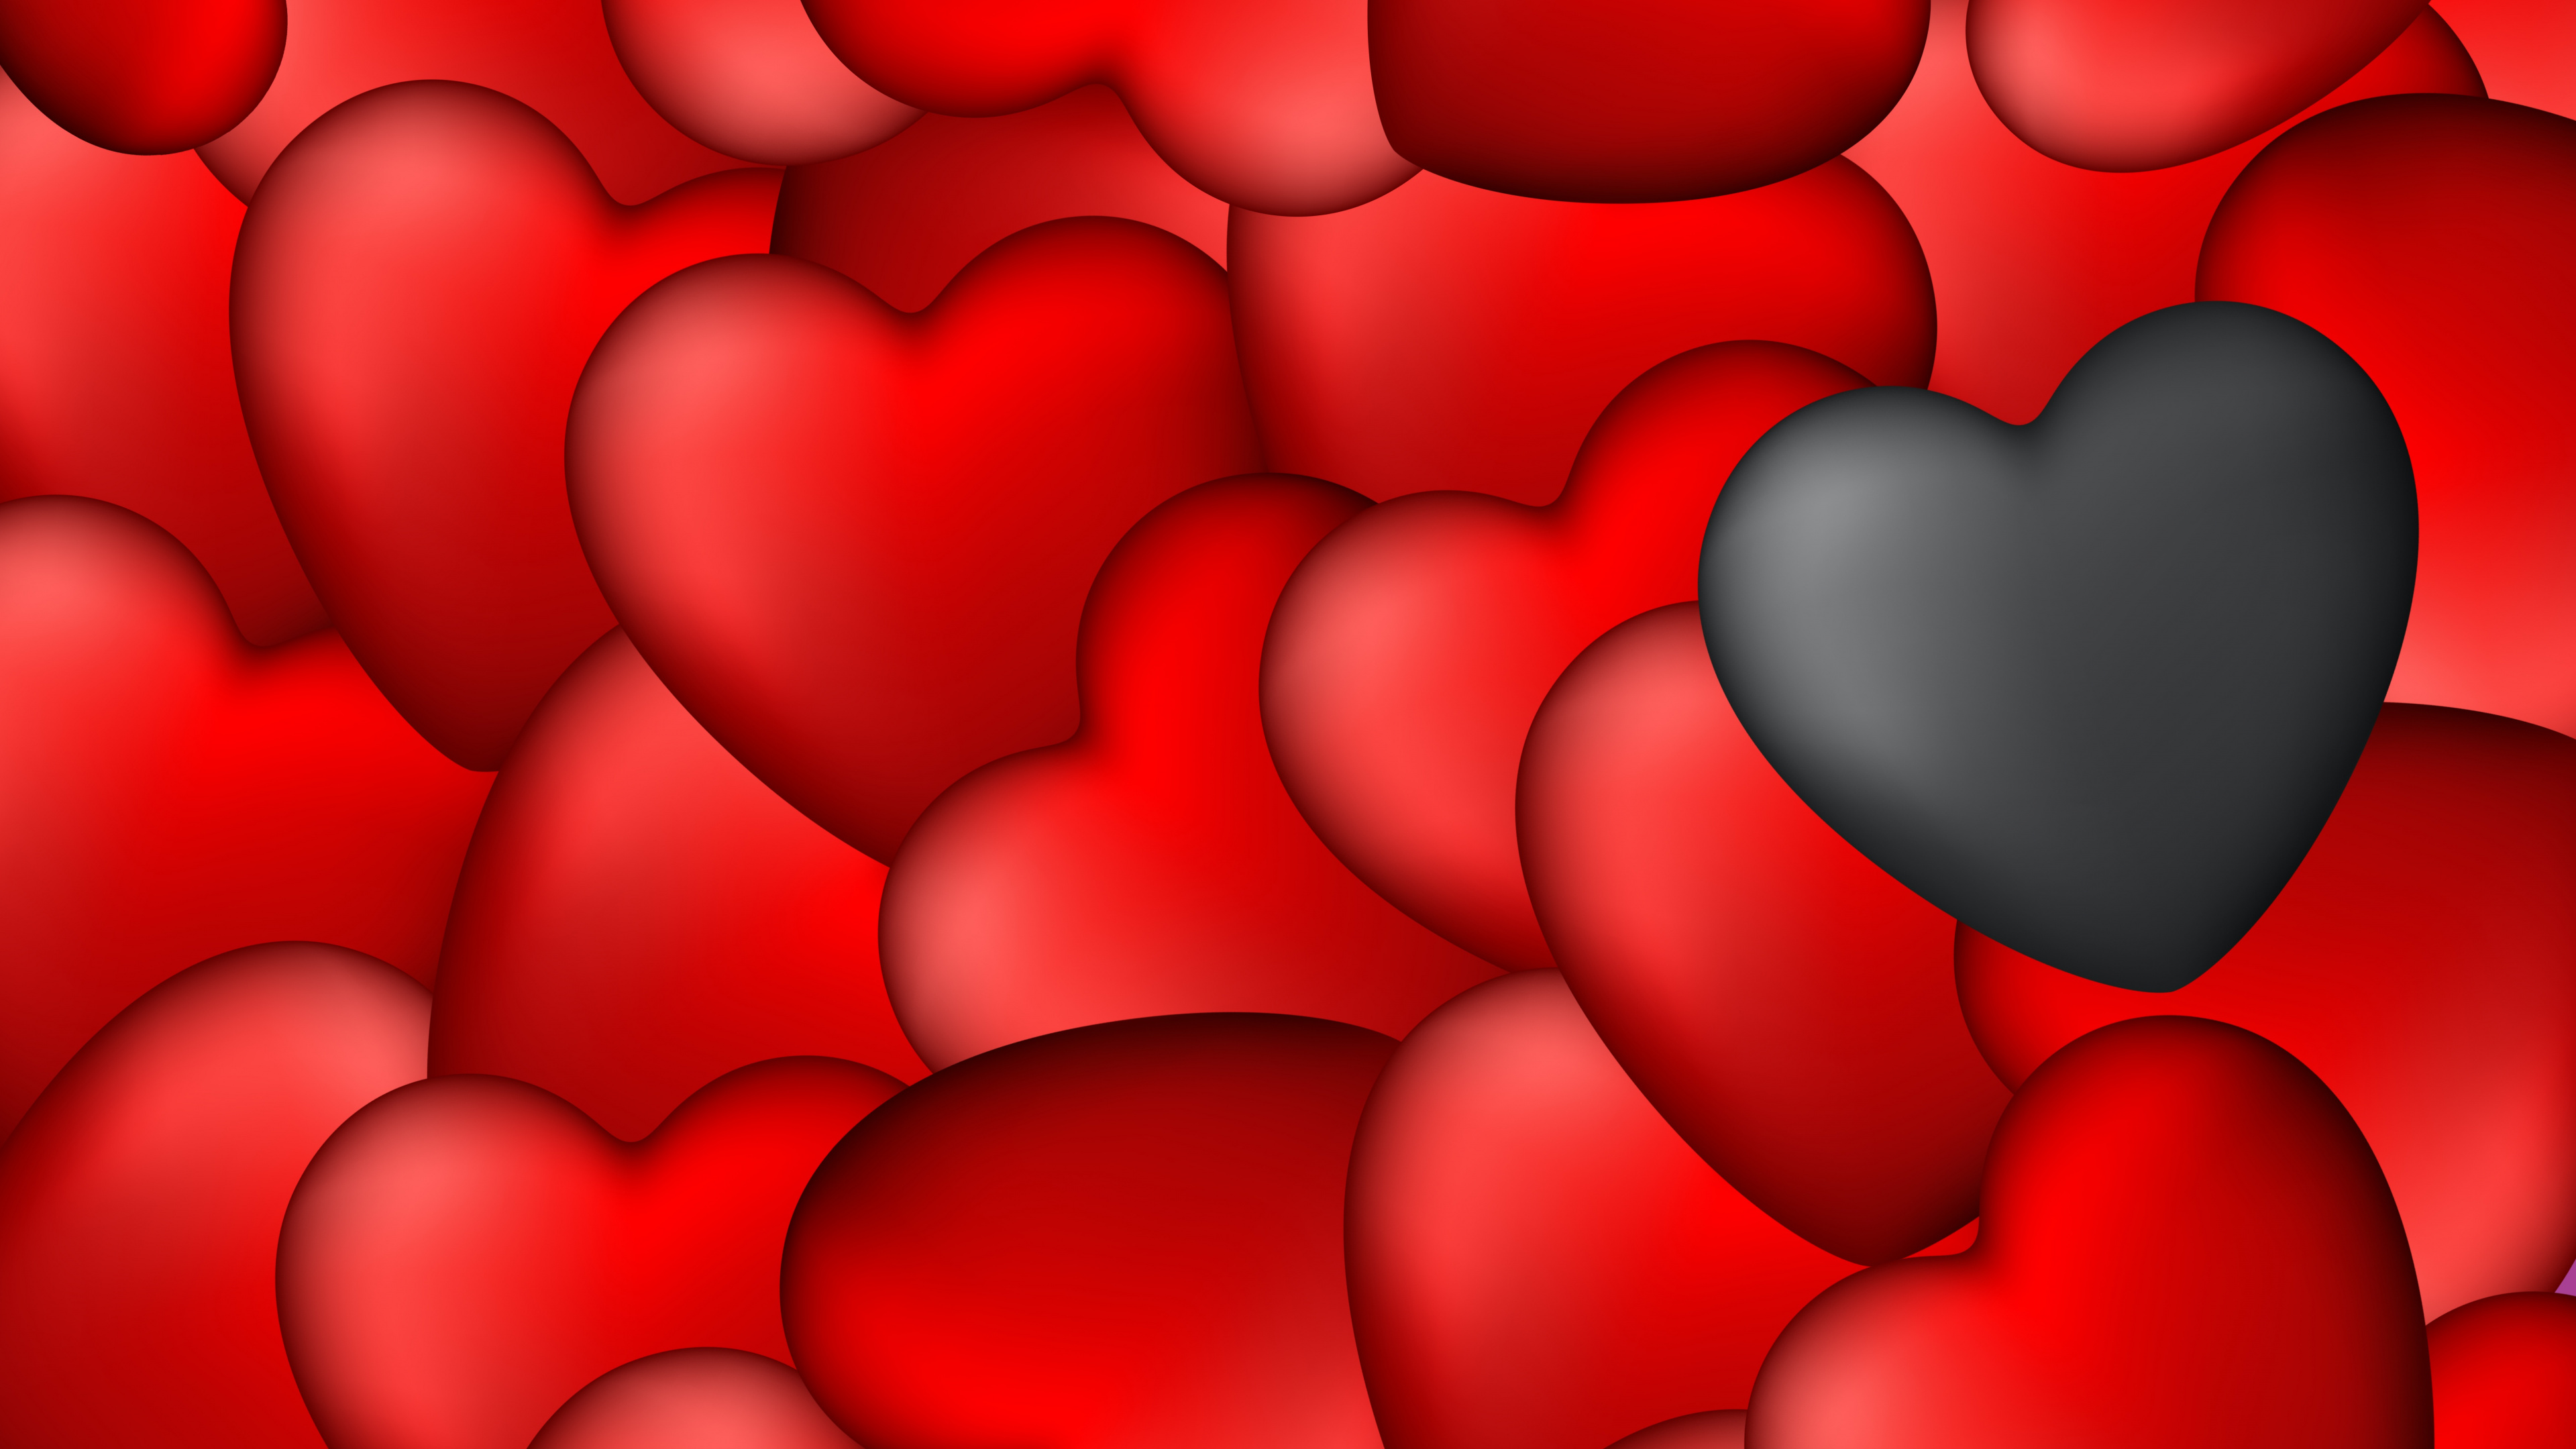 Heart, Black, Red, Valentines Day, Petal. Wallpaper in 3840x2160 Resolution